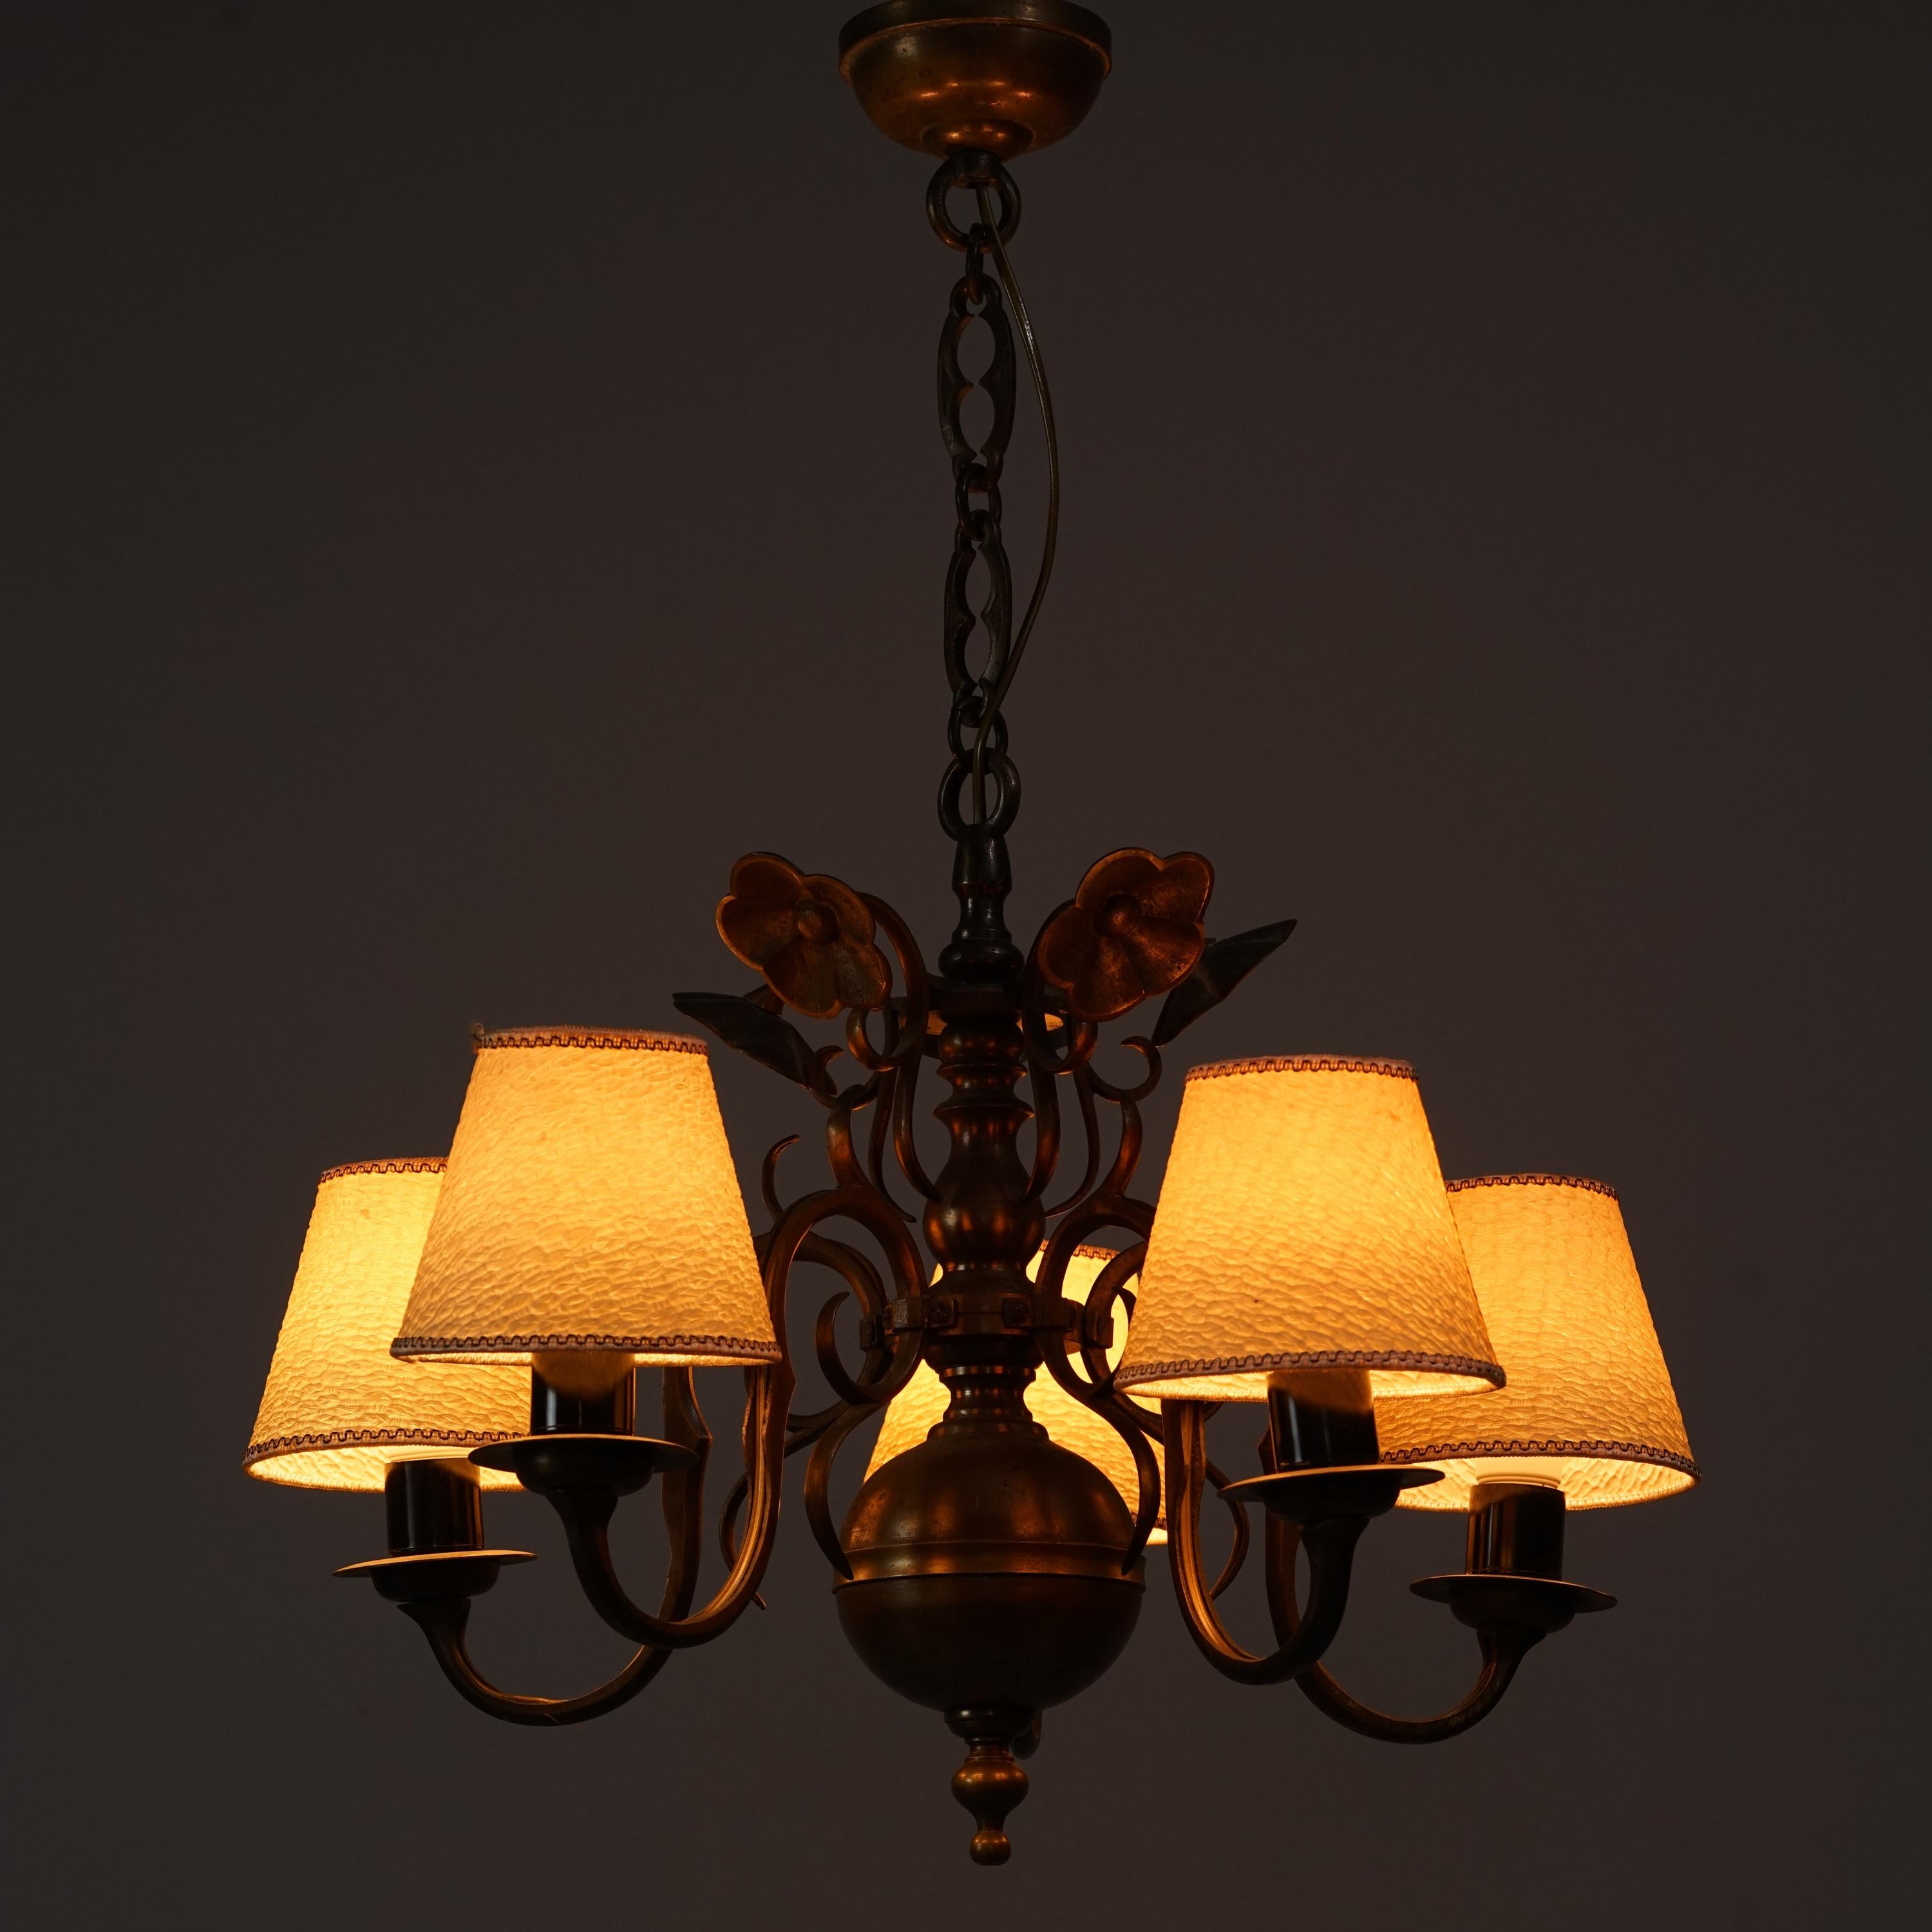 Rare Paavo Tynell Model 50488 Brass Chandelier for Taito Oy from the 1920/1930s For Sale 2